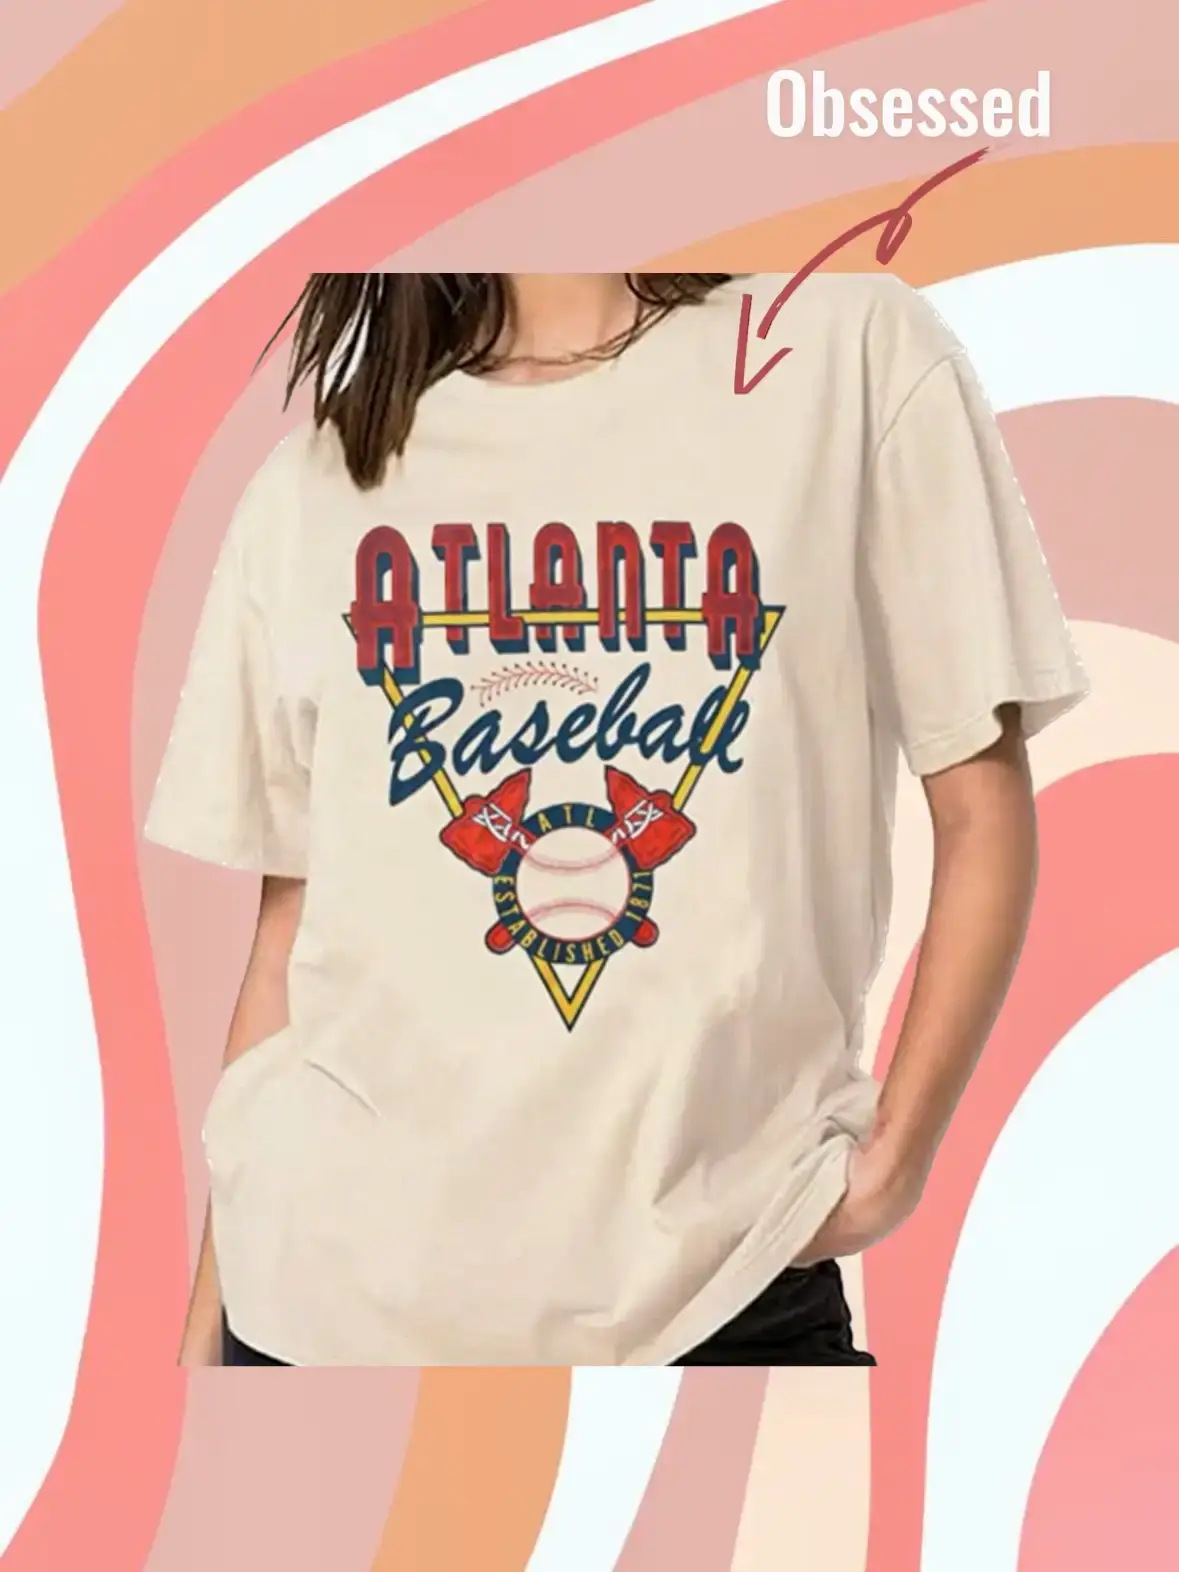 Baseball season is back!!! OOTD  Gallery posted by Ansley Parris